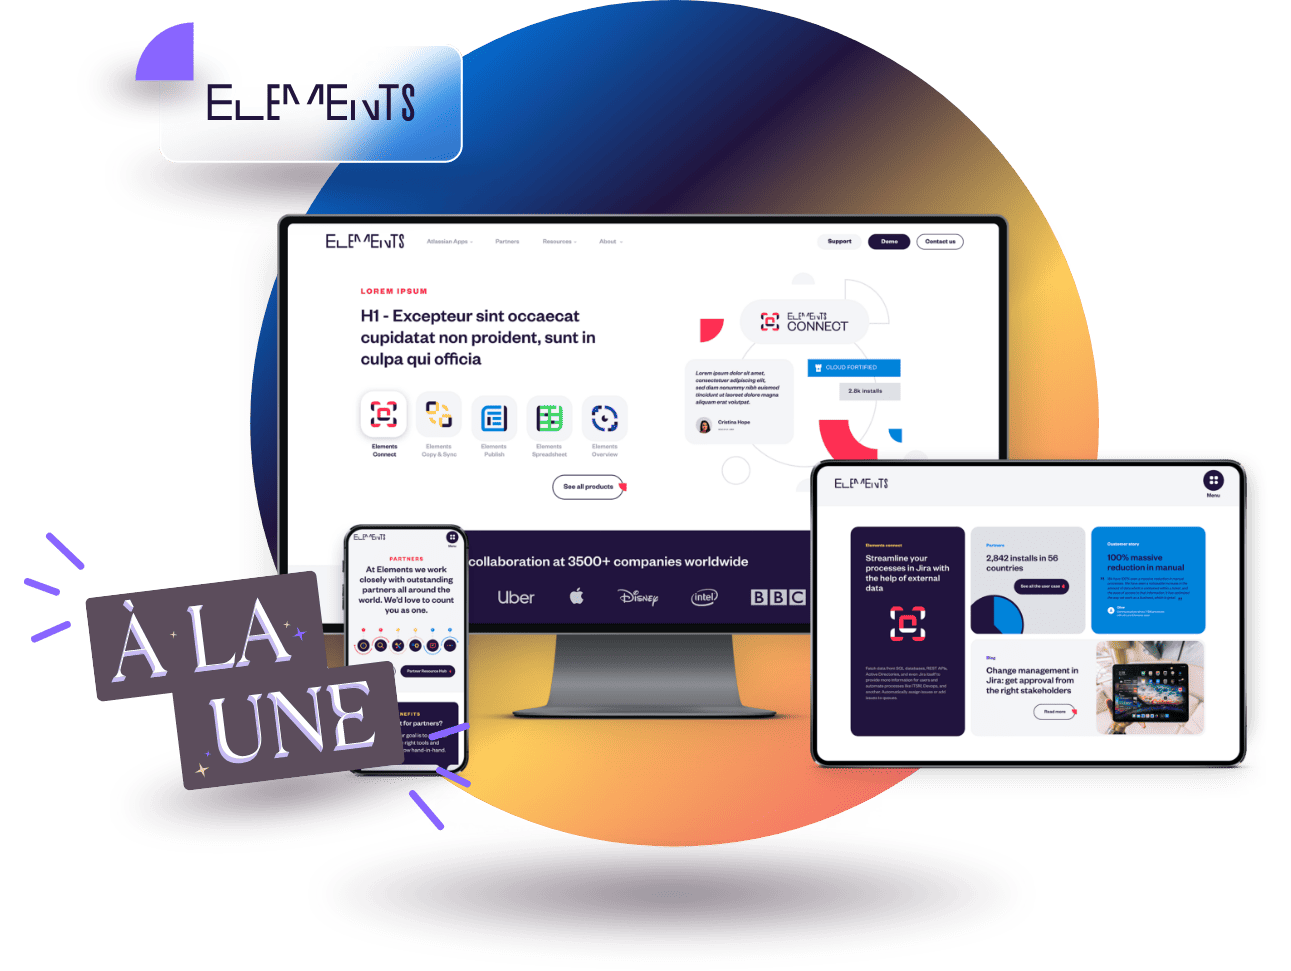 Elements Apps